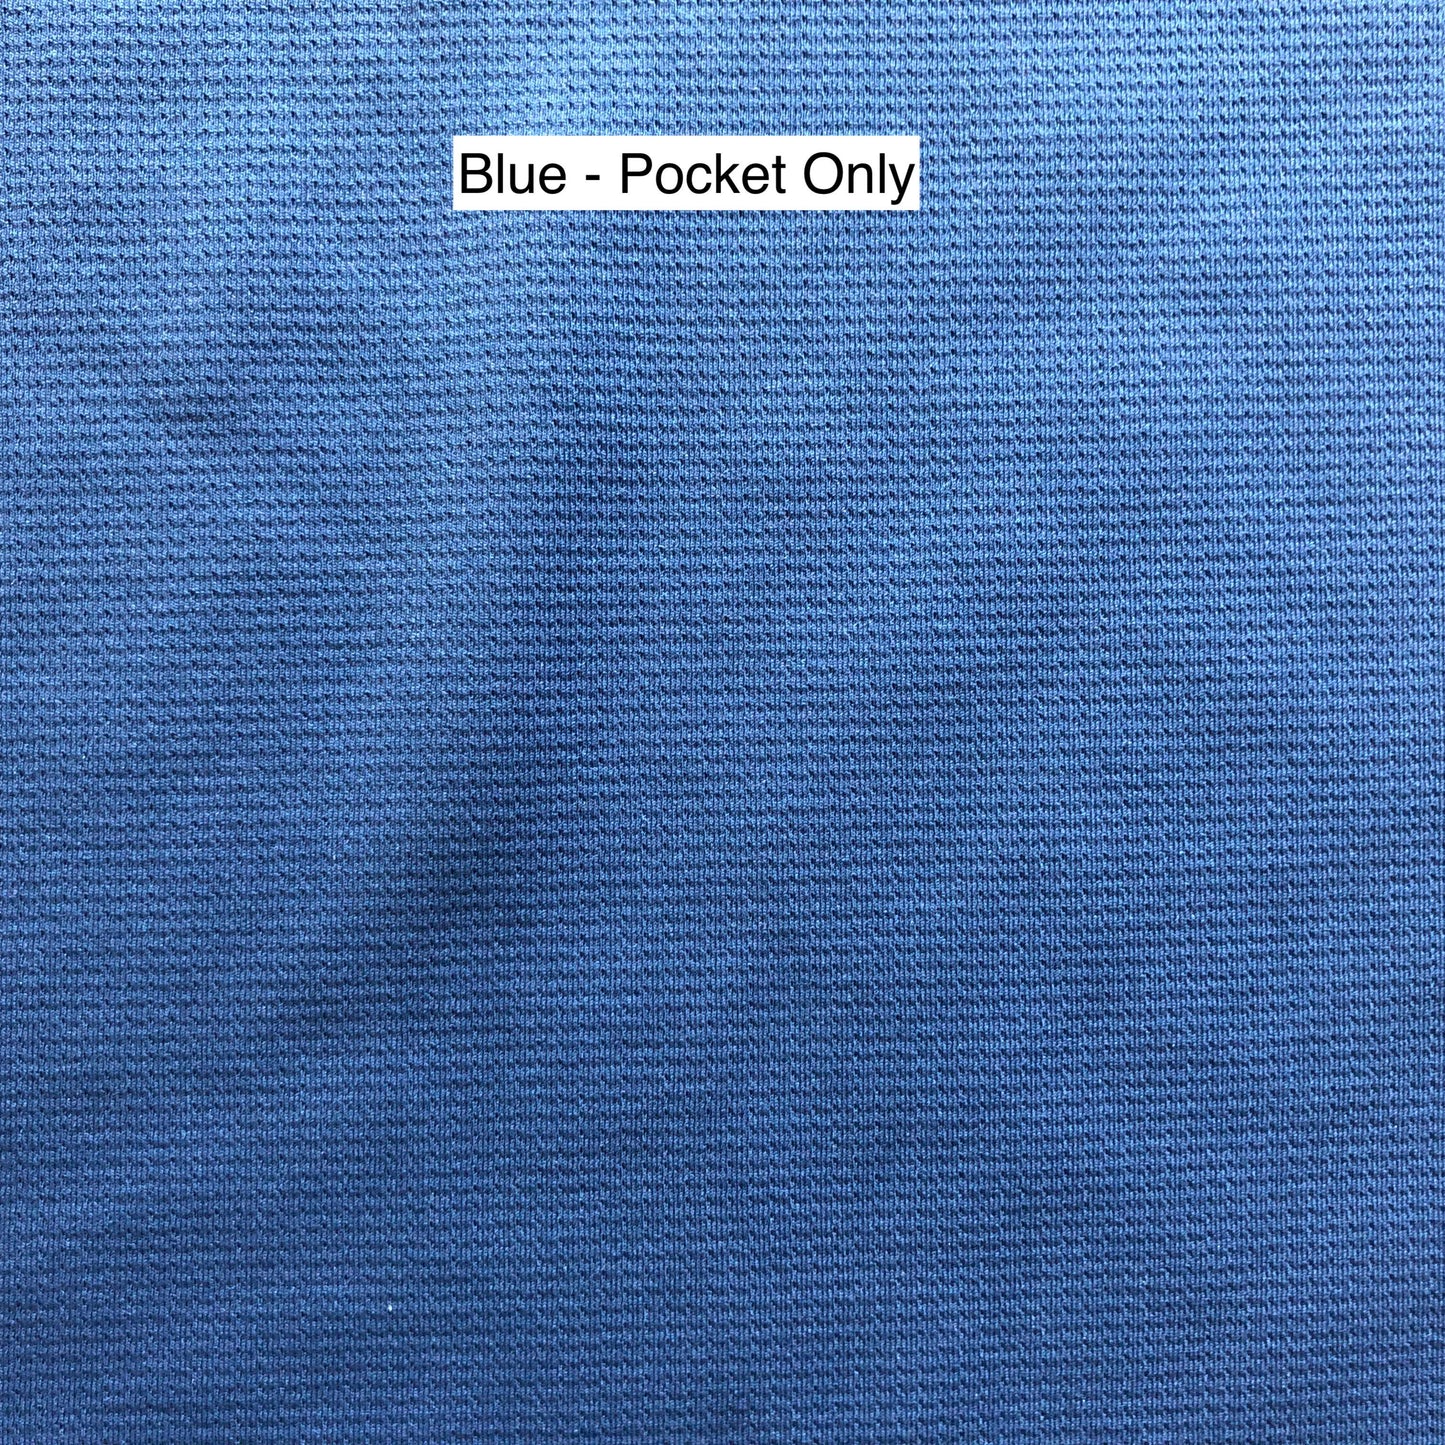 A swatch of Blue fabric.